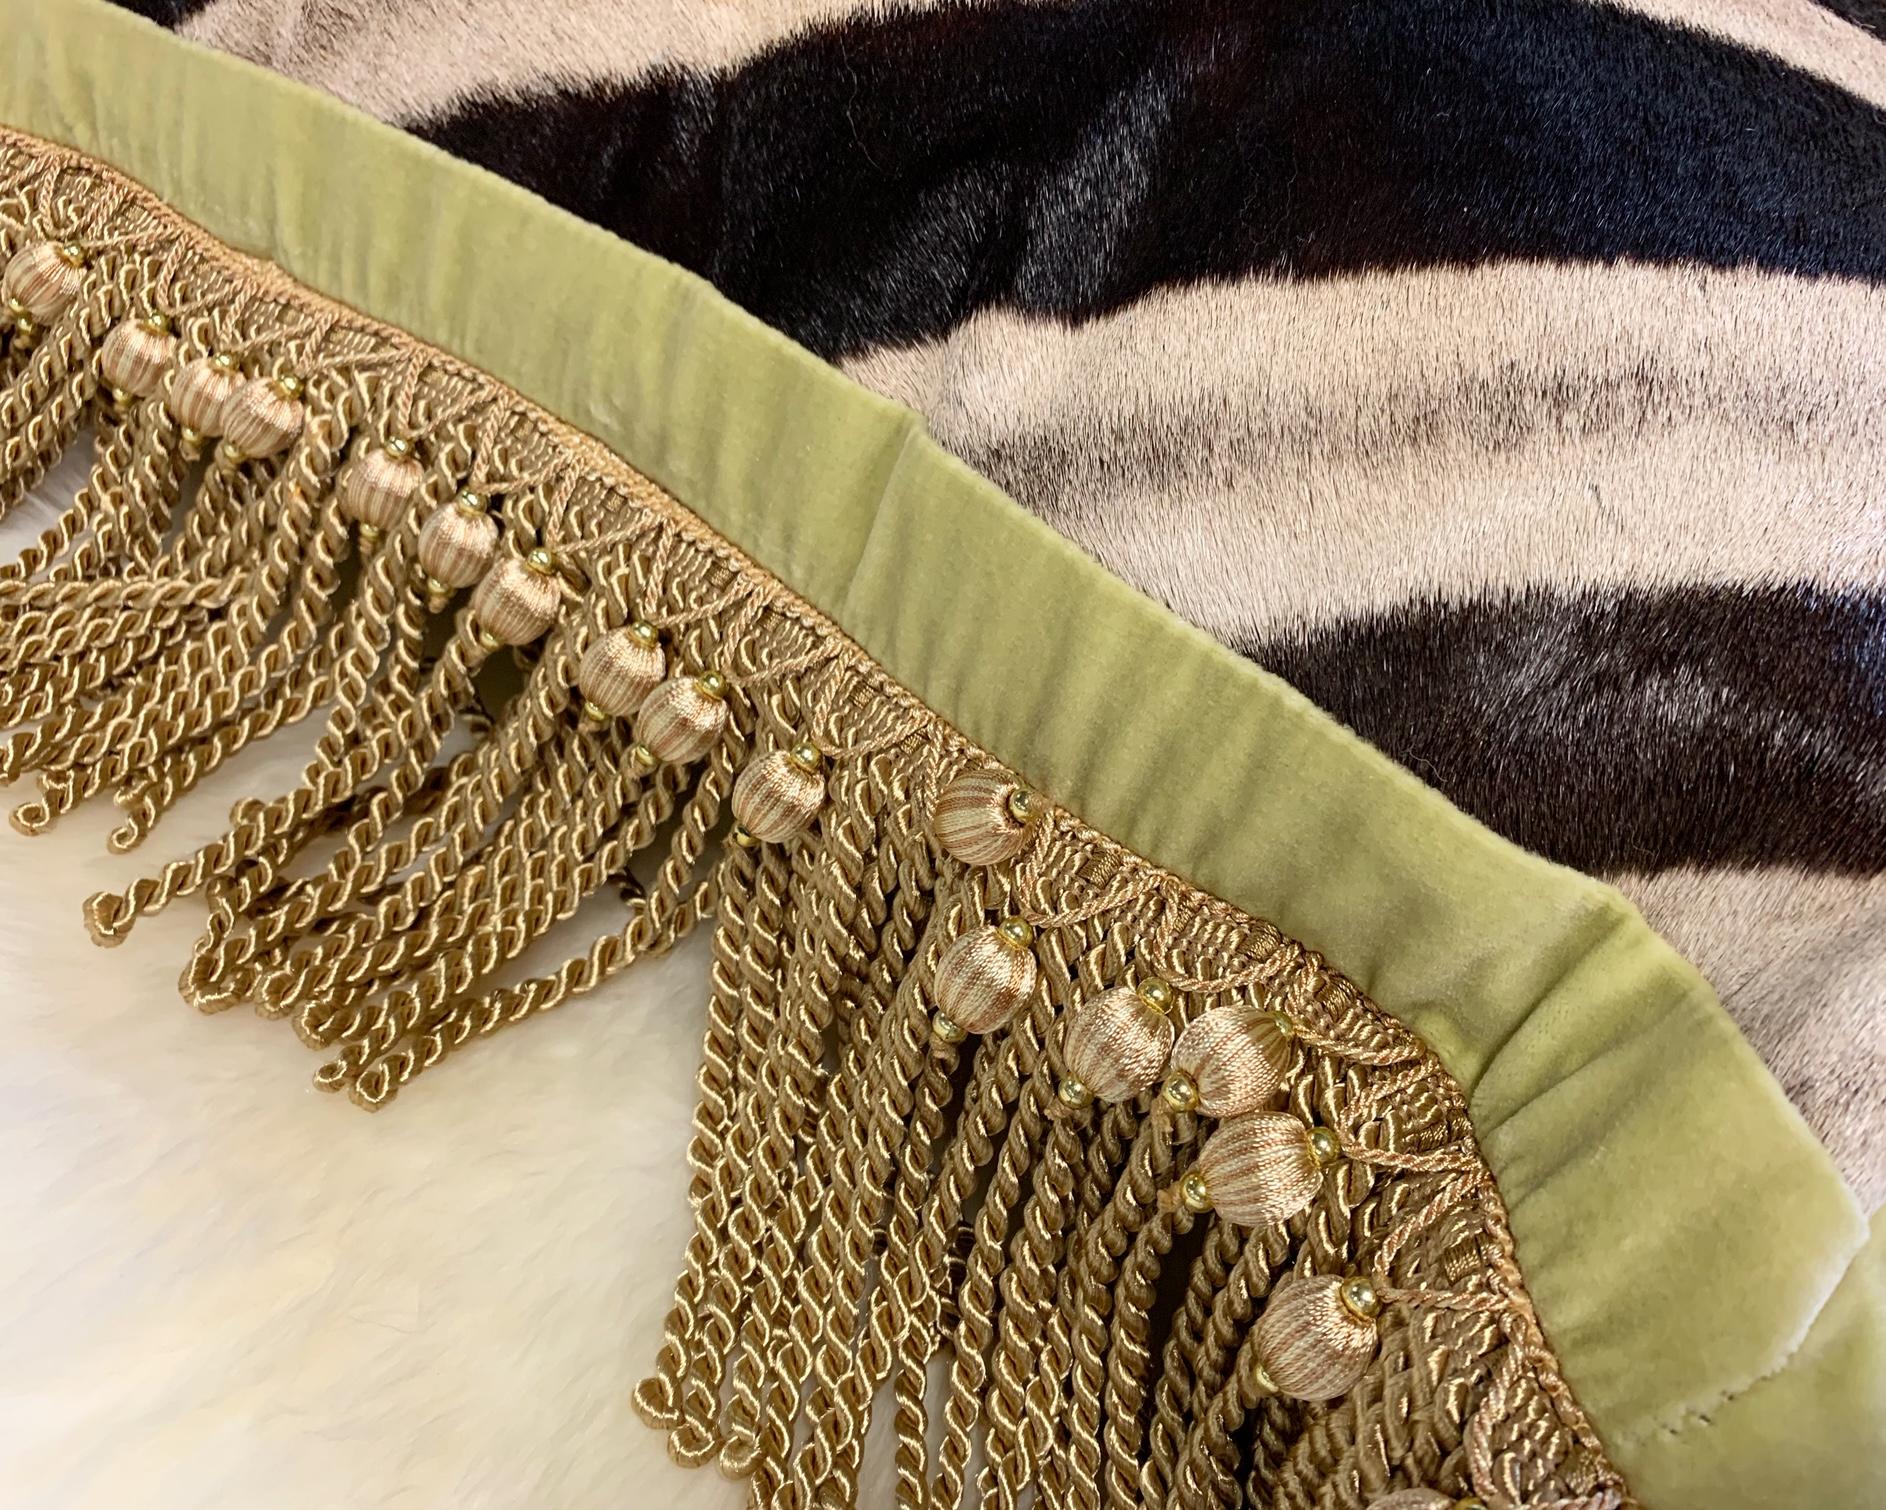 Forsyth zebra hide pillows are simply the best. The most beautiful hides are selected, handcut, handstitched, and hand stuffed with the finest goose down. Each step is meticulously curated by Saint Louis based Forsyth artisans. This gold fringe and